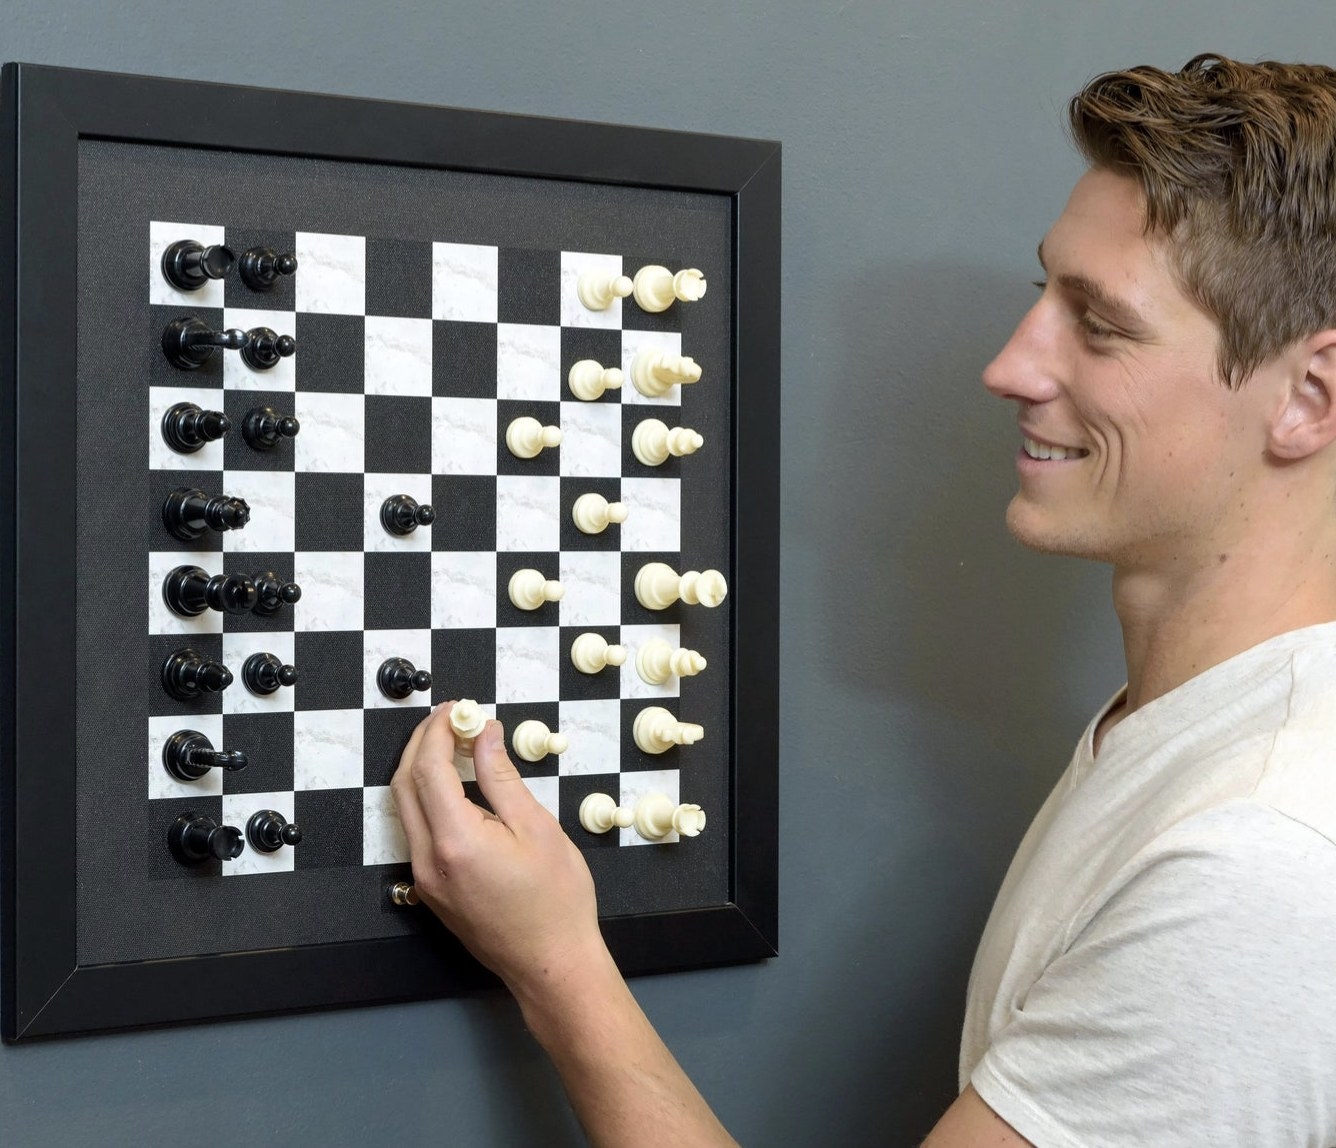 A person playing chess